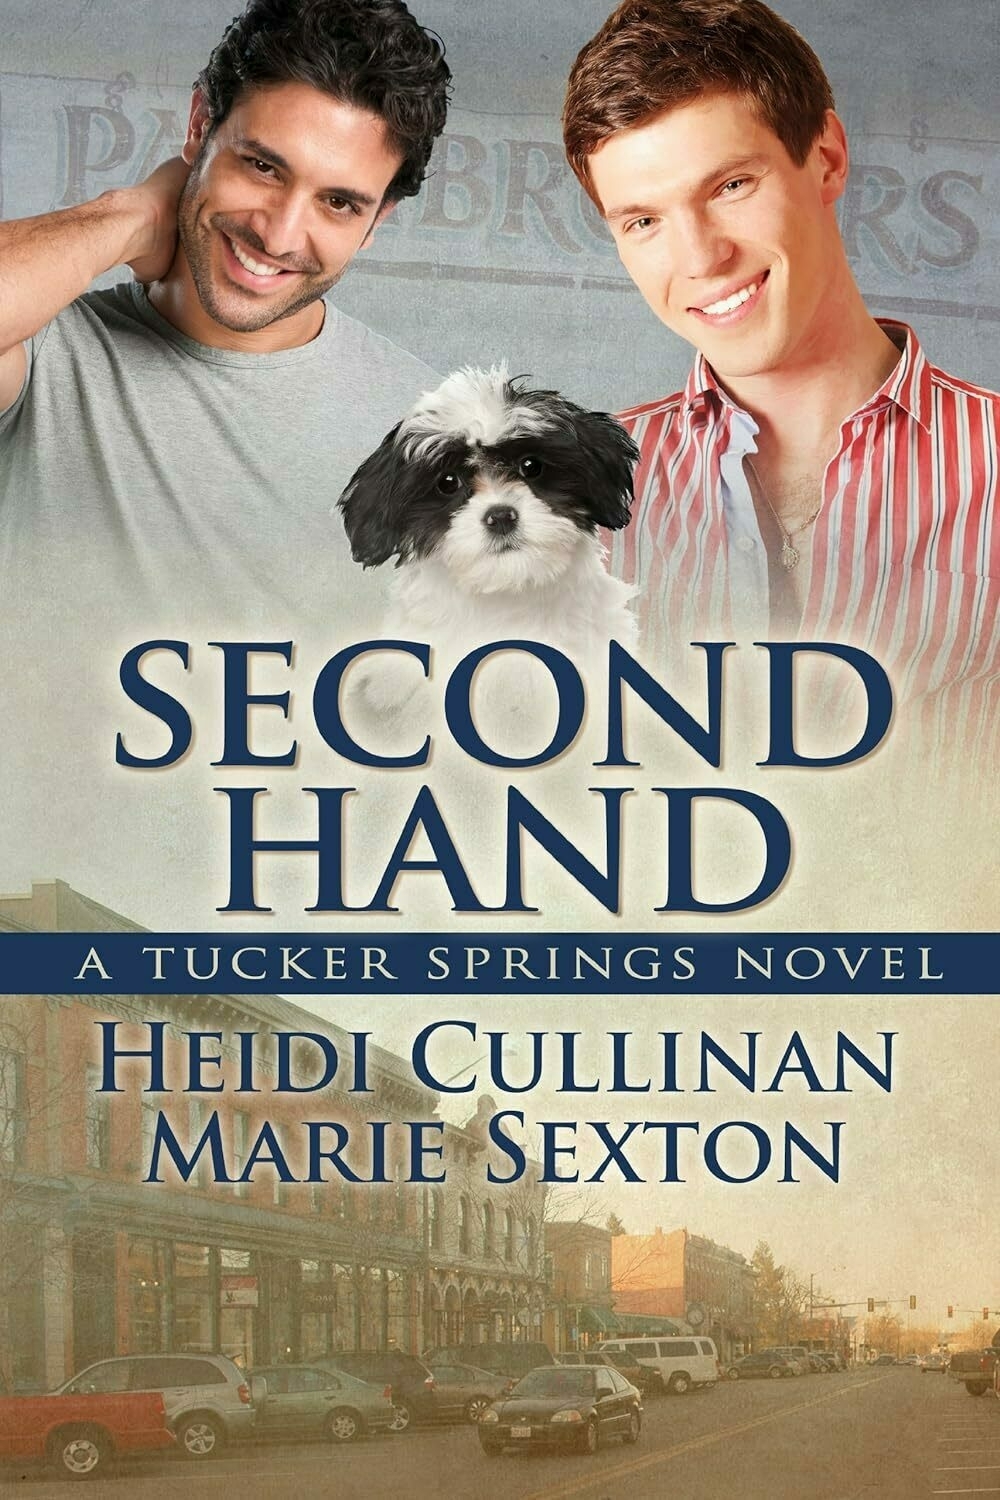 Book cover art for Second Hand.